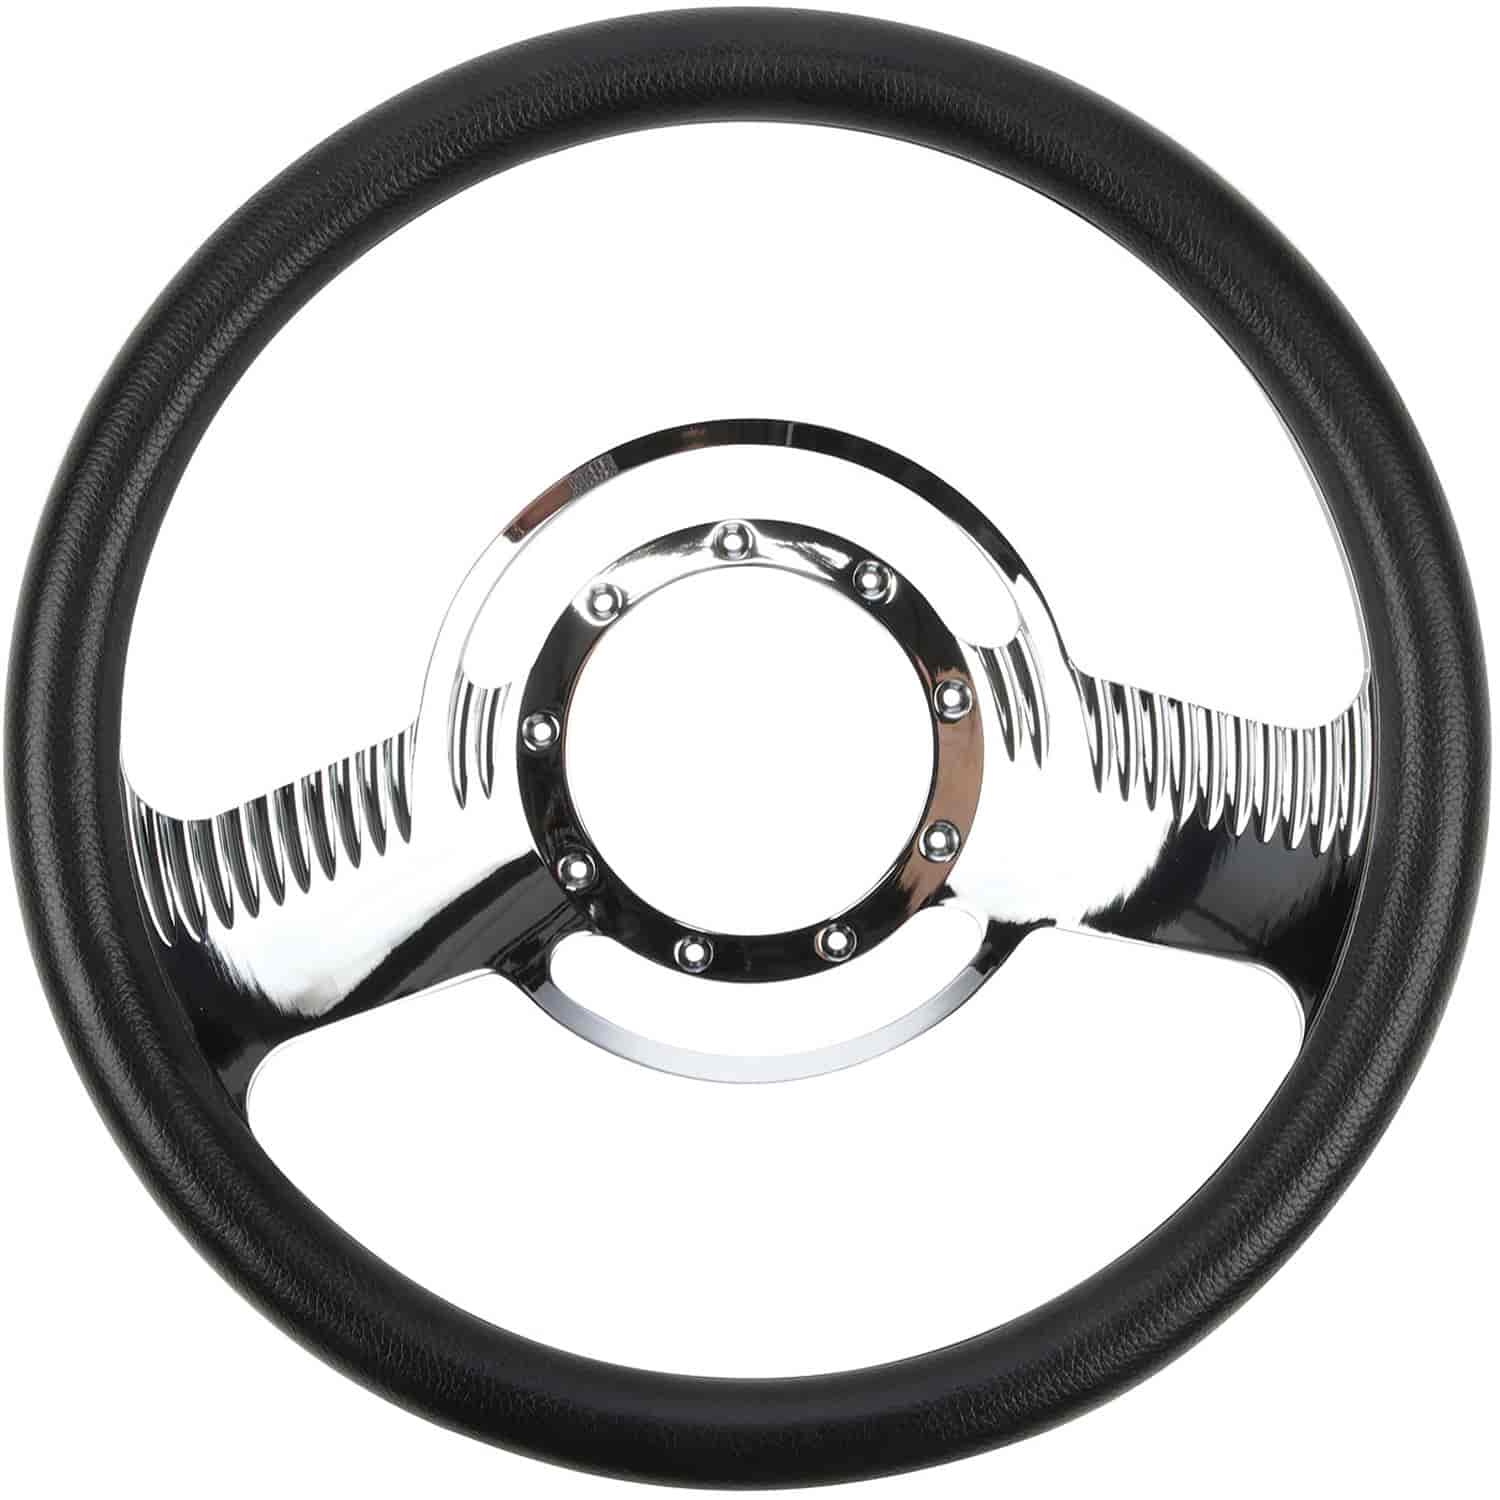 Chrome-Plated Billet Aluminum 14 in. Steering Wheel [Two